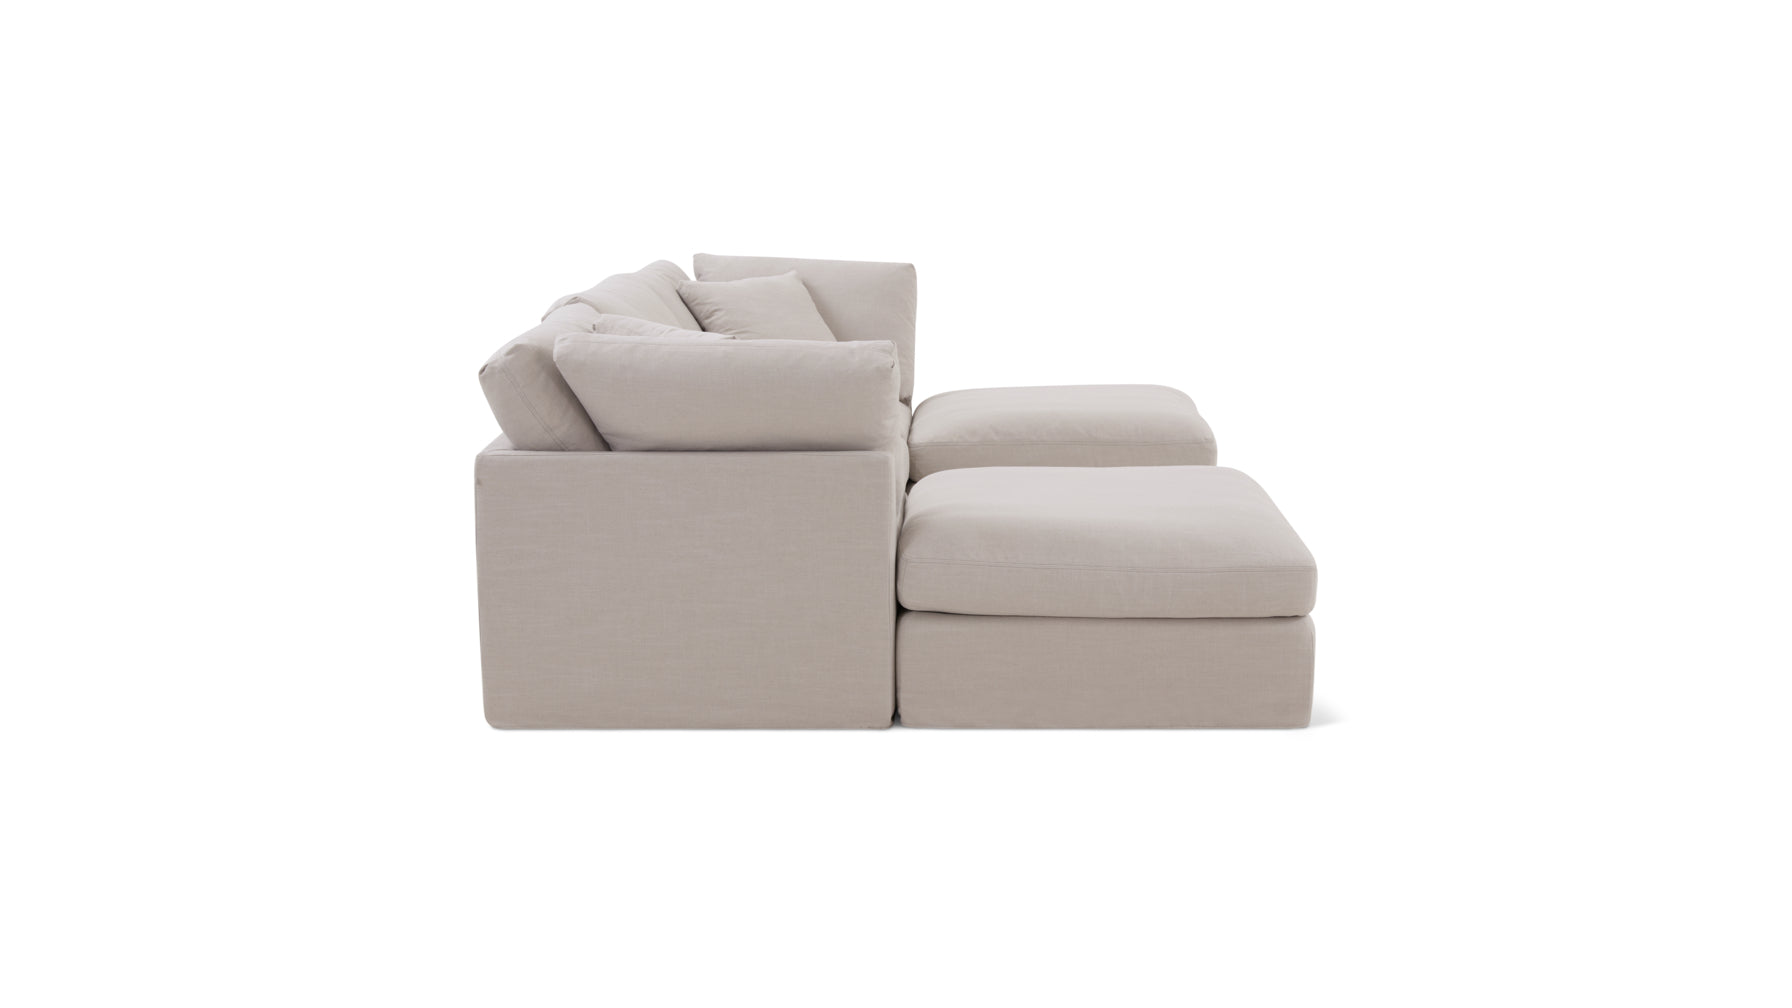 Get Together™ 5-Piece Modular U-Shaped Sectional, Standard, Clay - Image 6